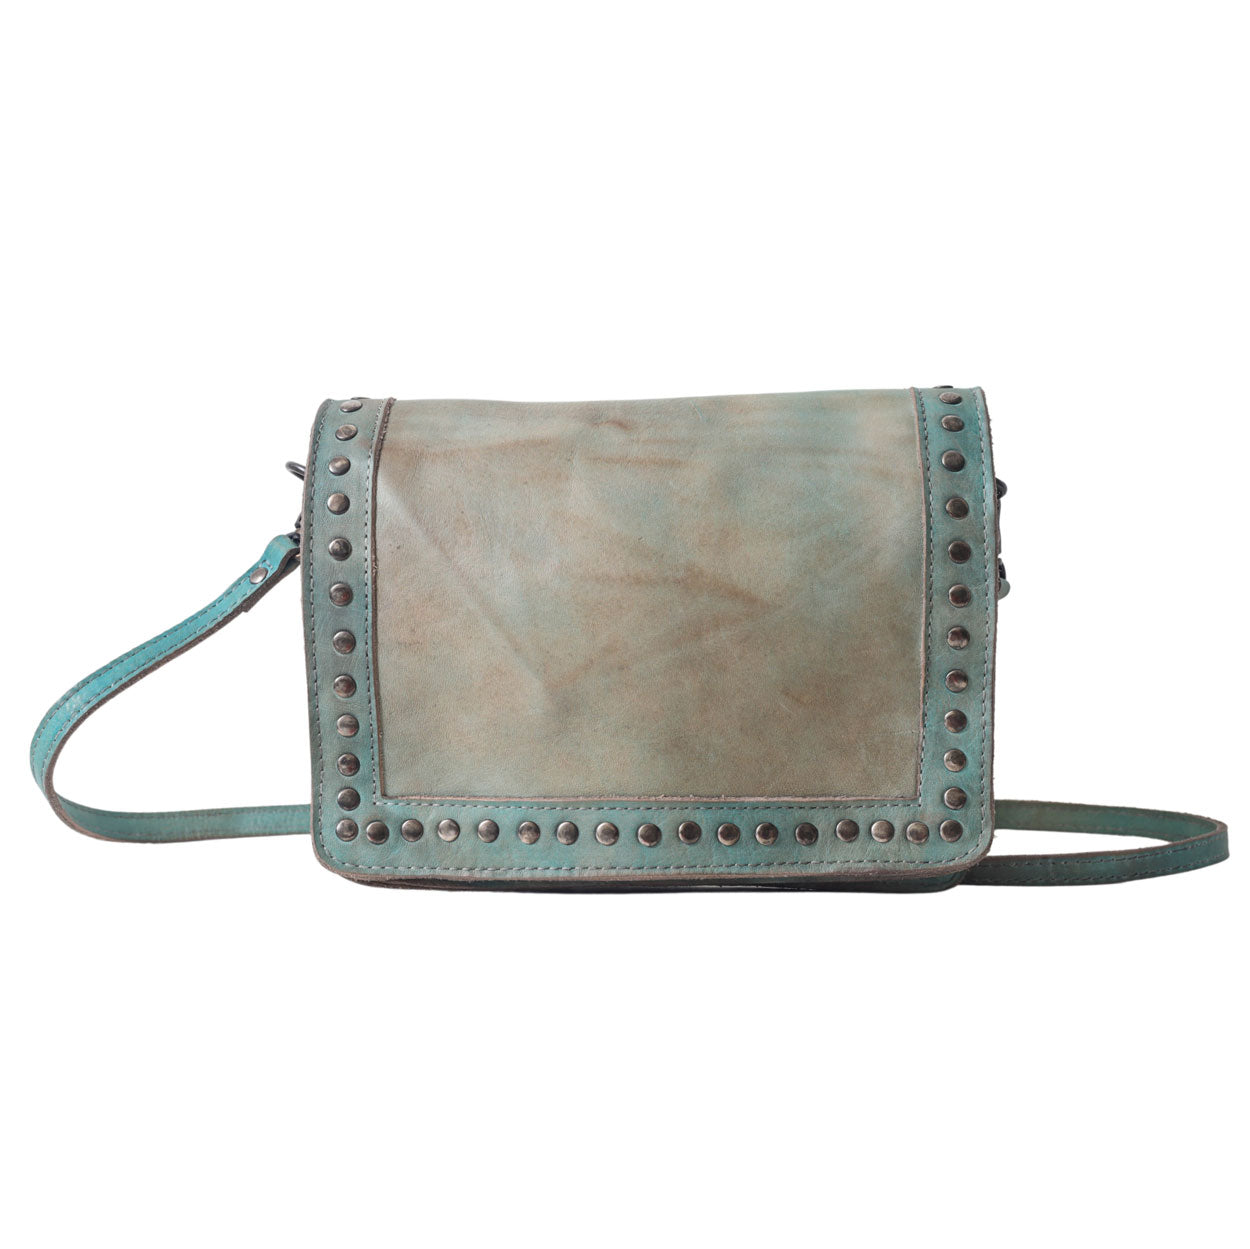 Turquoise Leather Handbag by Never Mind